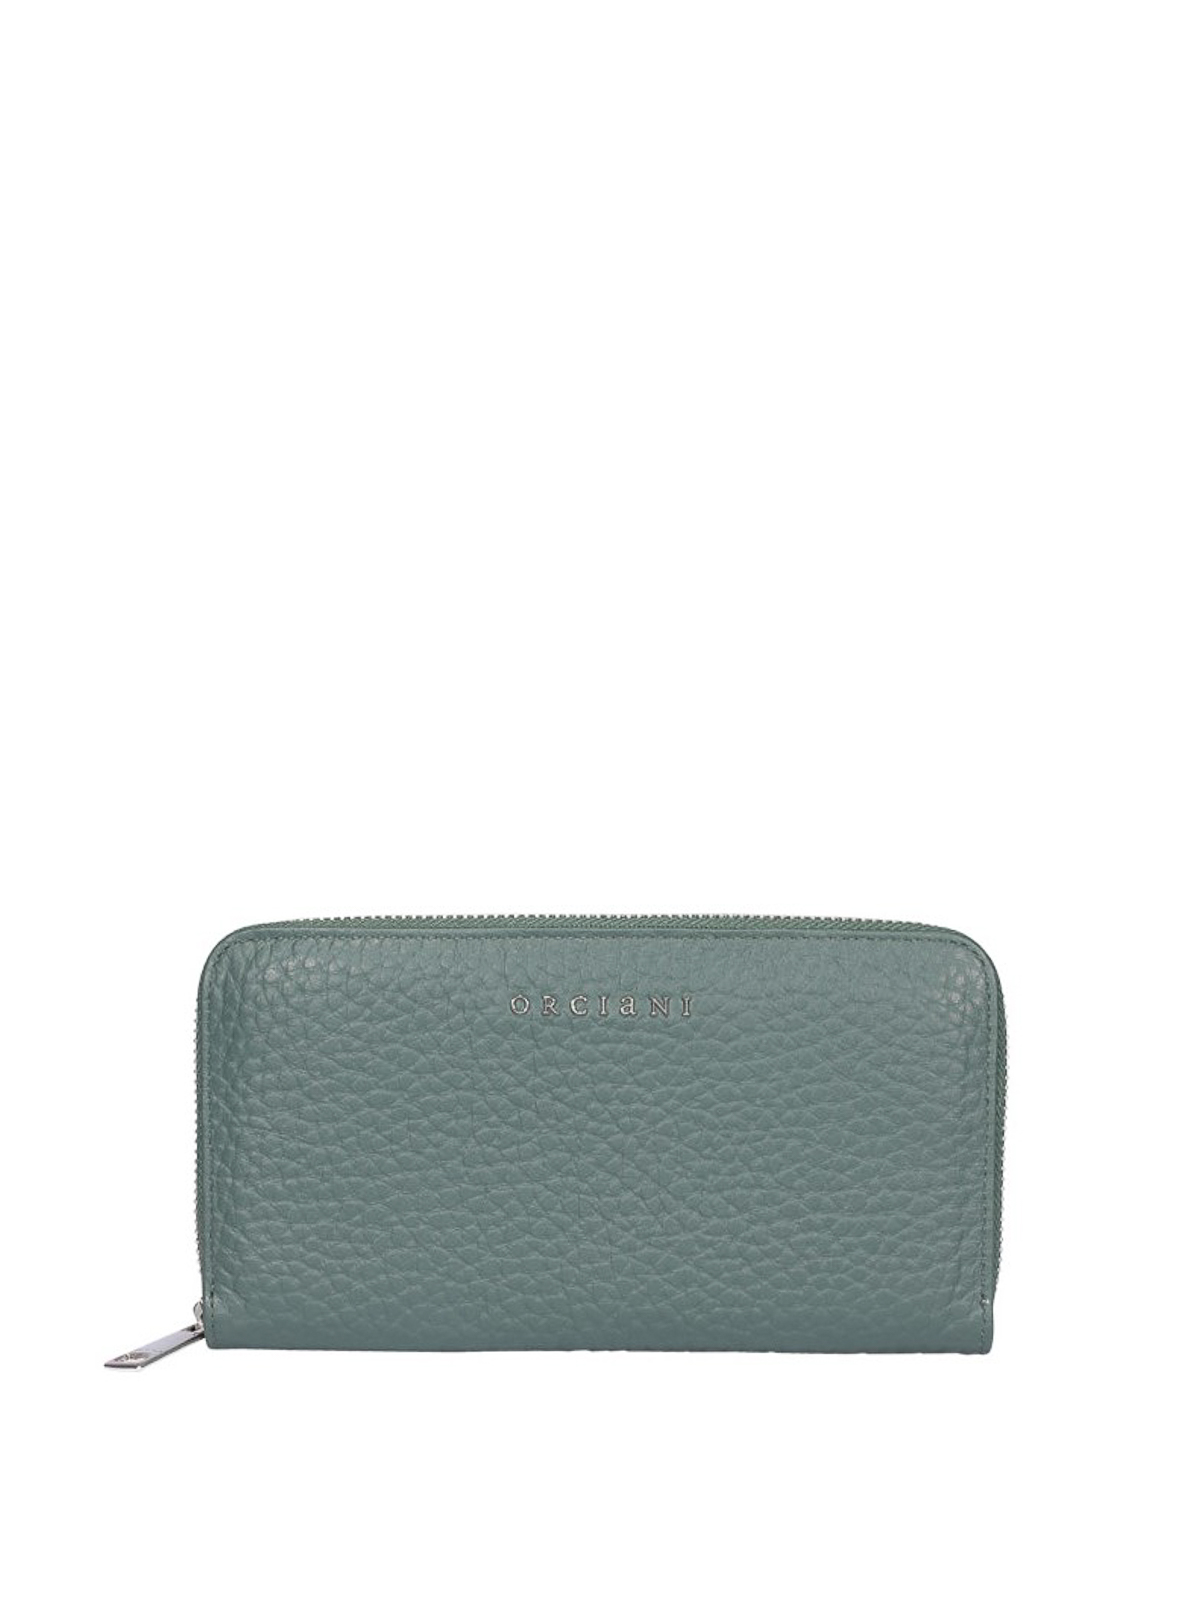 ORCIANI GREEN LEATHER SOFT ZIP AROUND WALLET